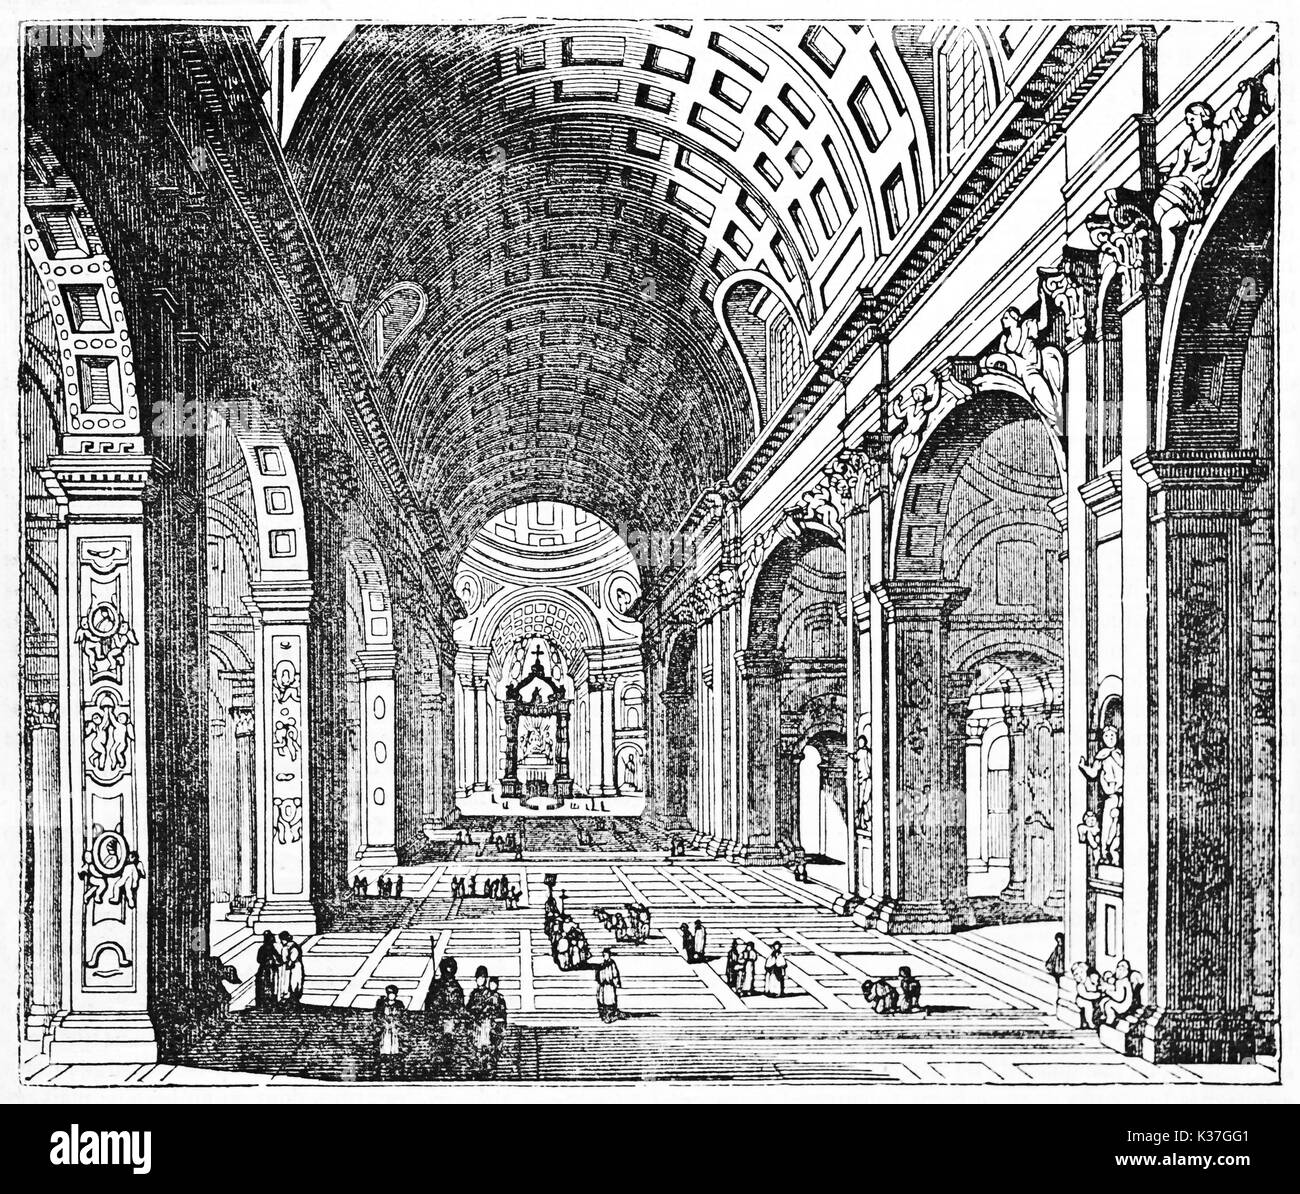 Awesome central perspective view of Saint Peter basilica interior Rome. Old Illustration by unidentified author published on Magasin Pittoresque Paris 1834 Stock Photo